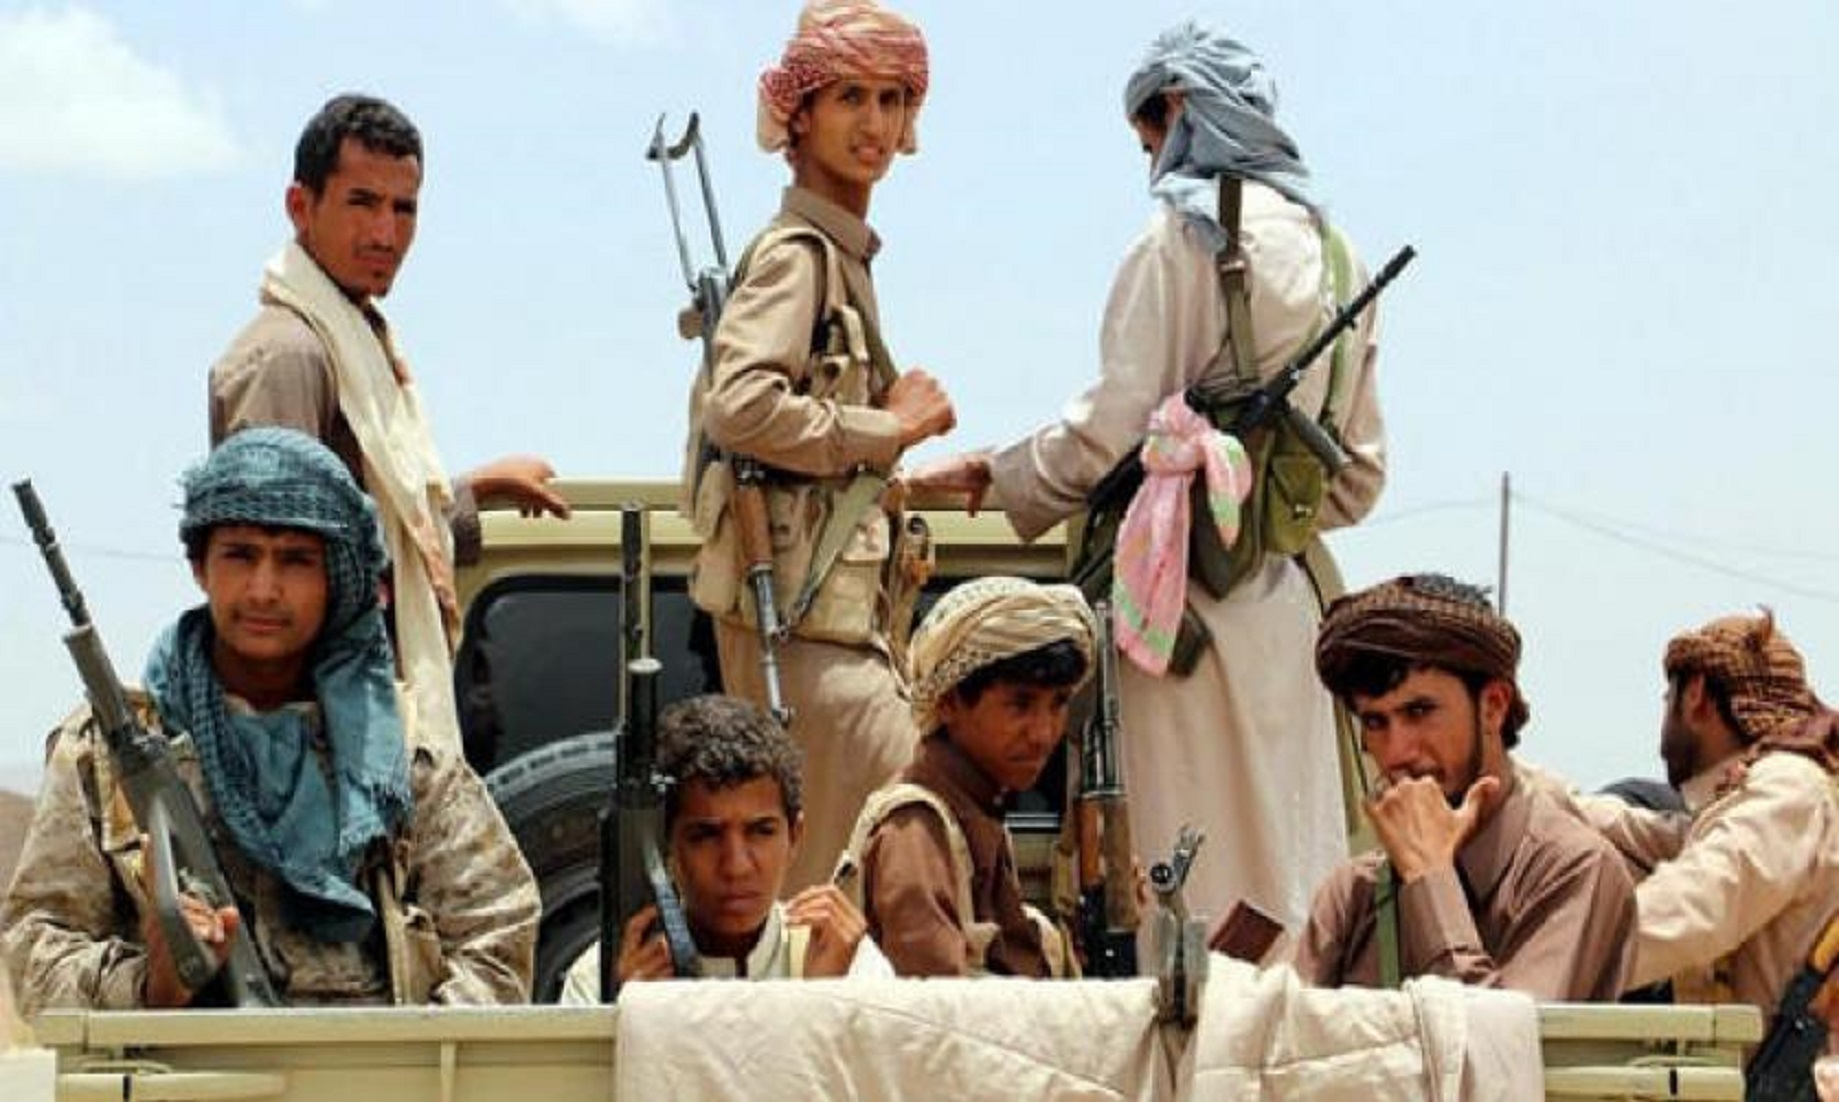 Yemeni Gov’t Accuses Houthi Rebels Of Recruiting Children In Conflict